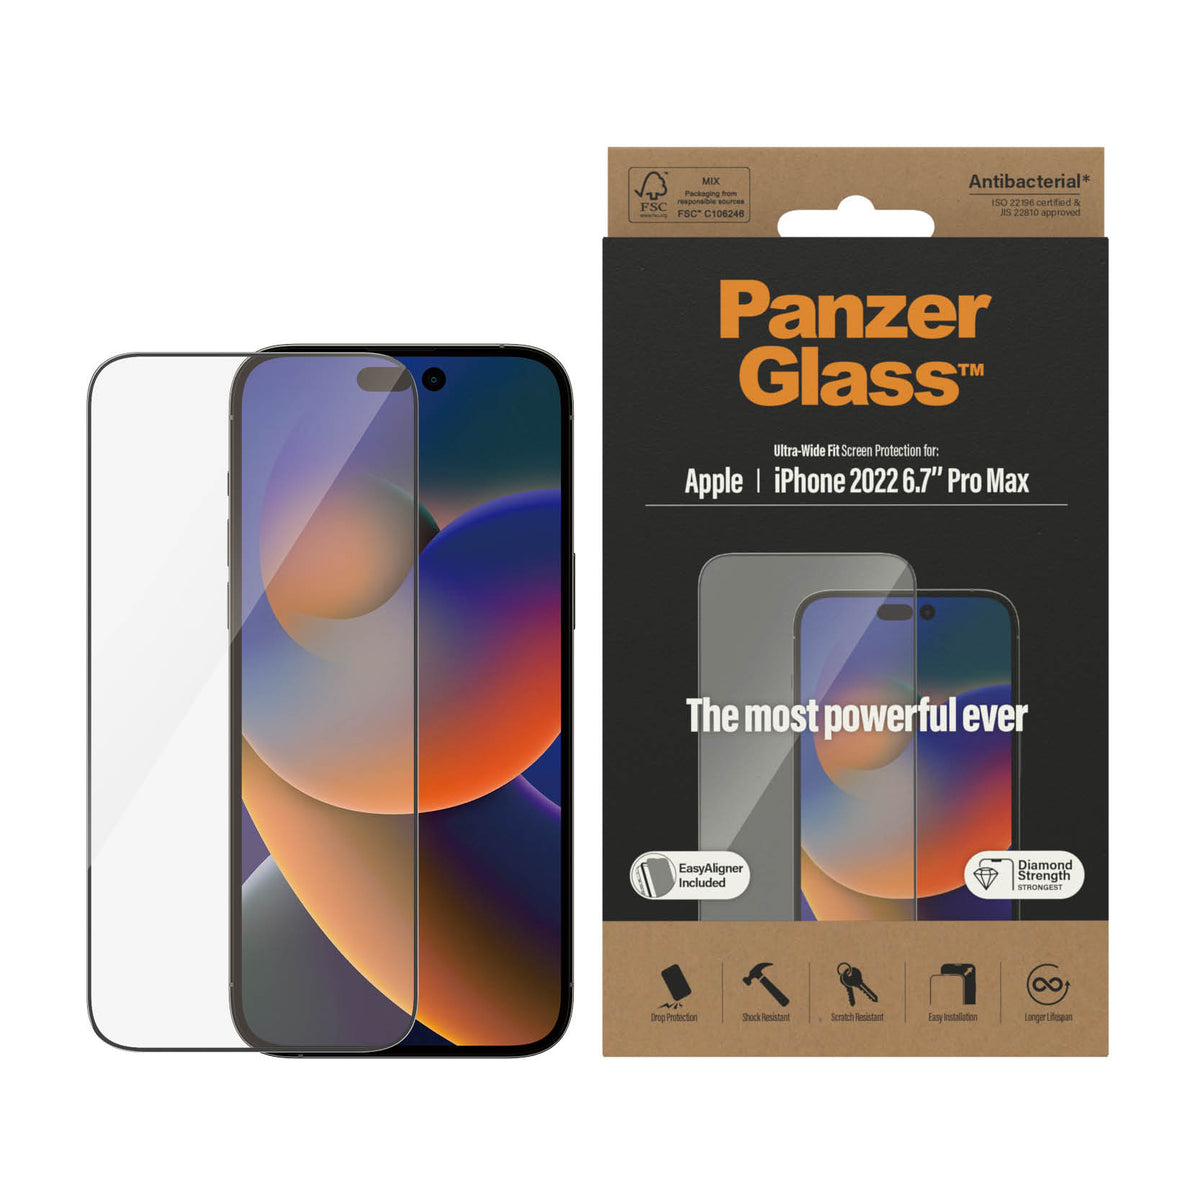 PANZERGLASS iPhone 14 Pro Max - Ultra-Wide Fit Screen Protector with Applicator - Clear